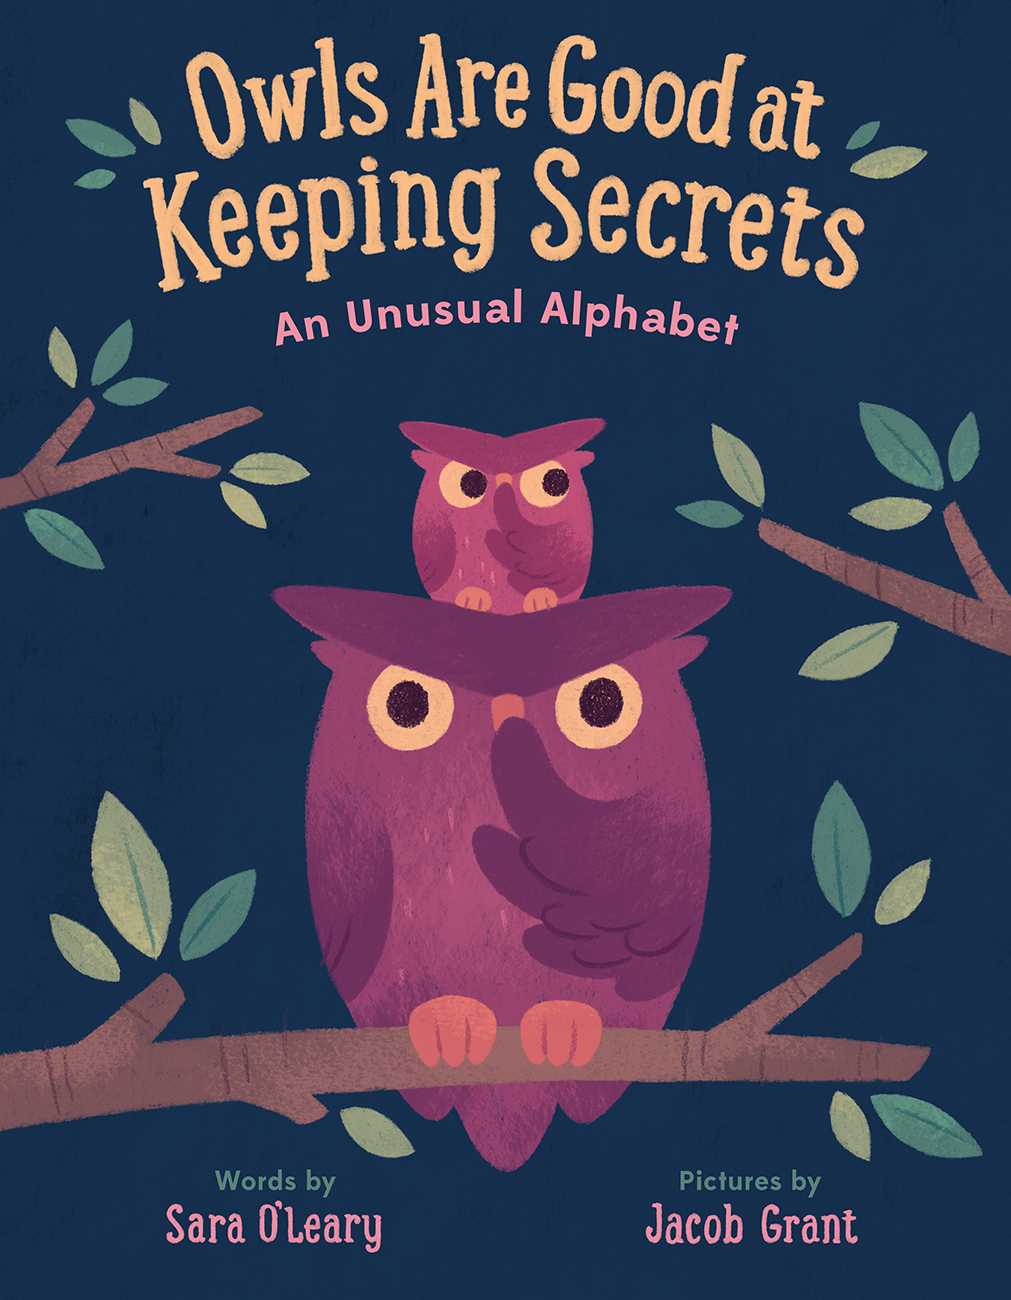 Owls are Good at Keeping Secrets: An Unusual Alphabet